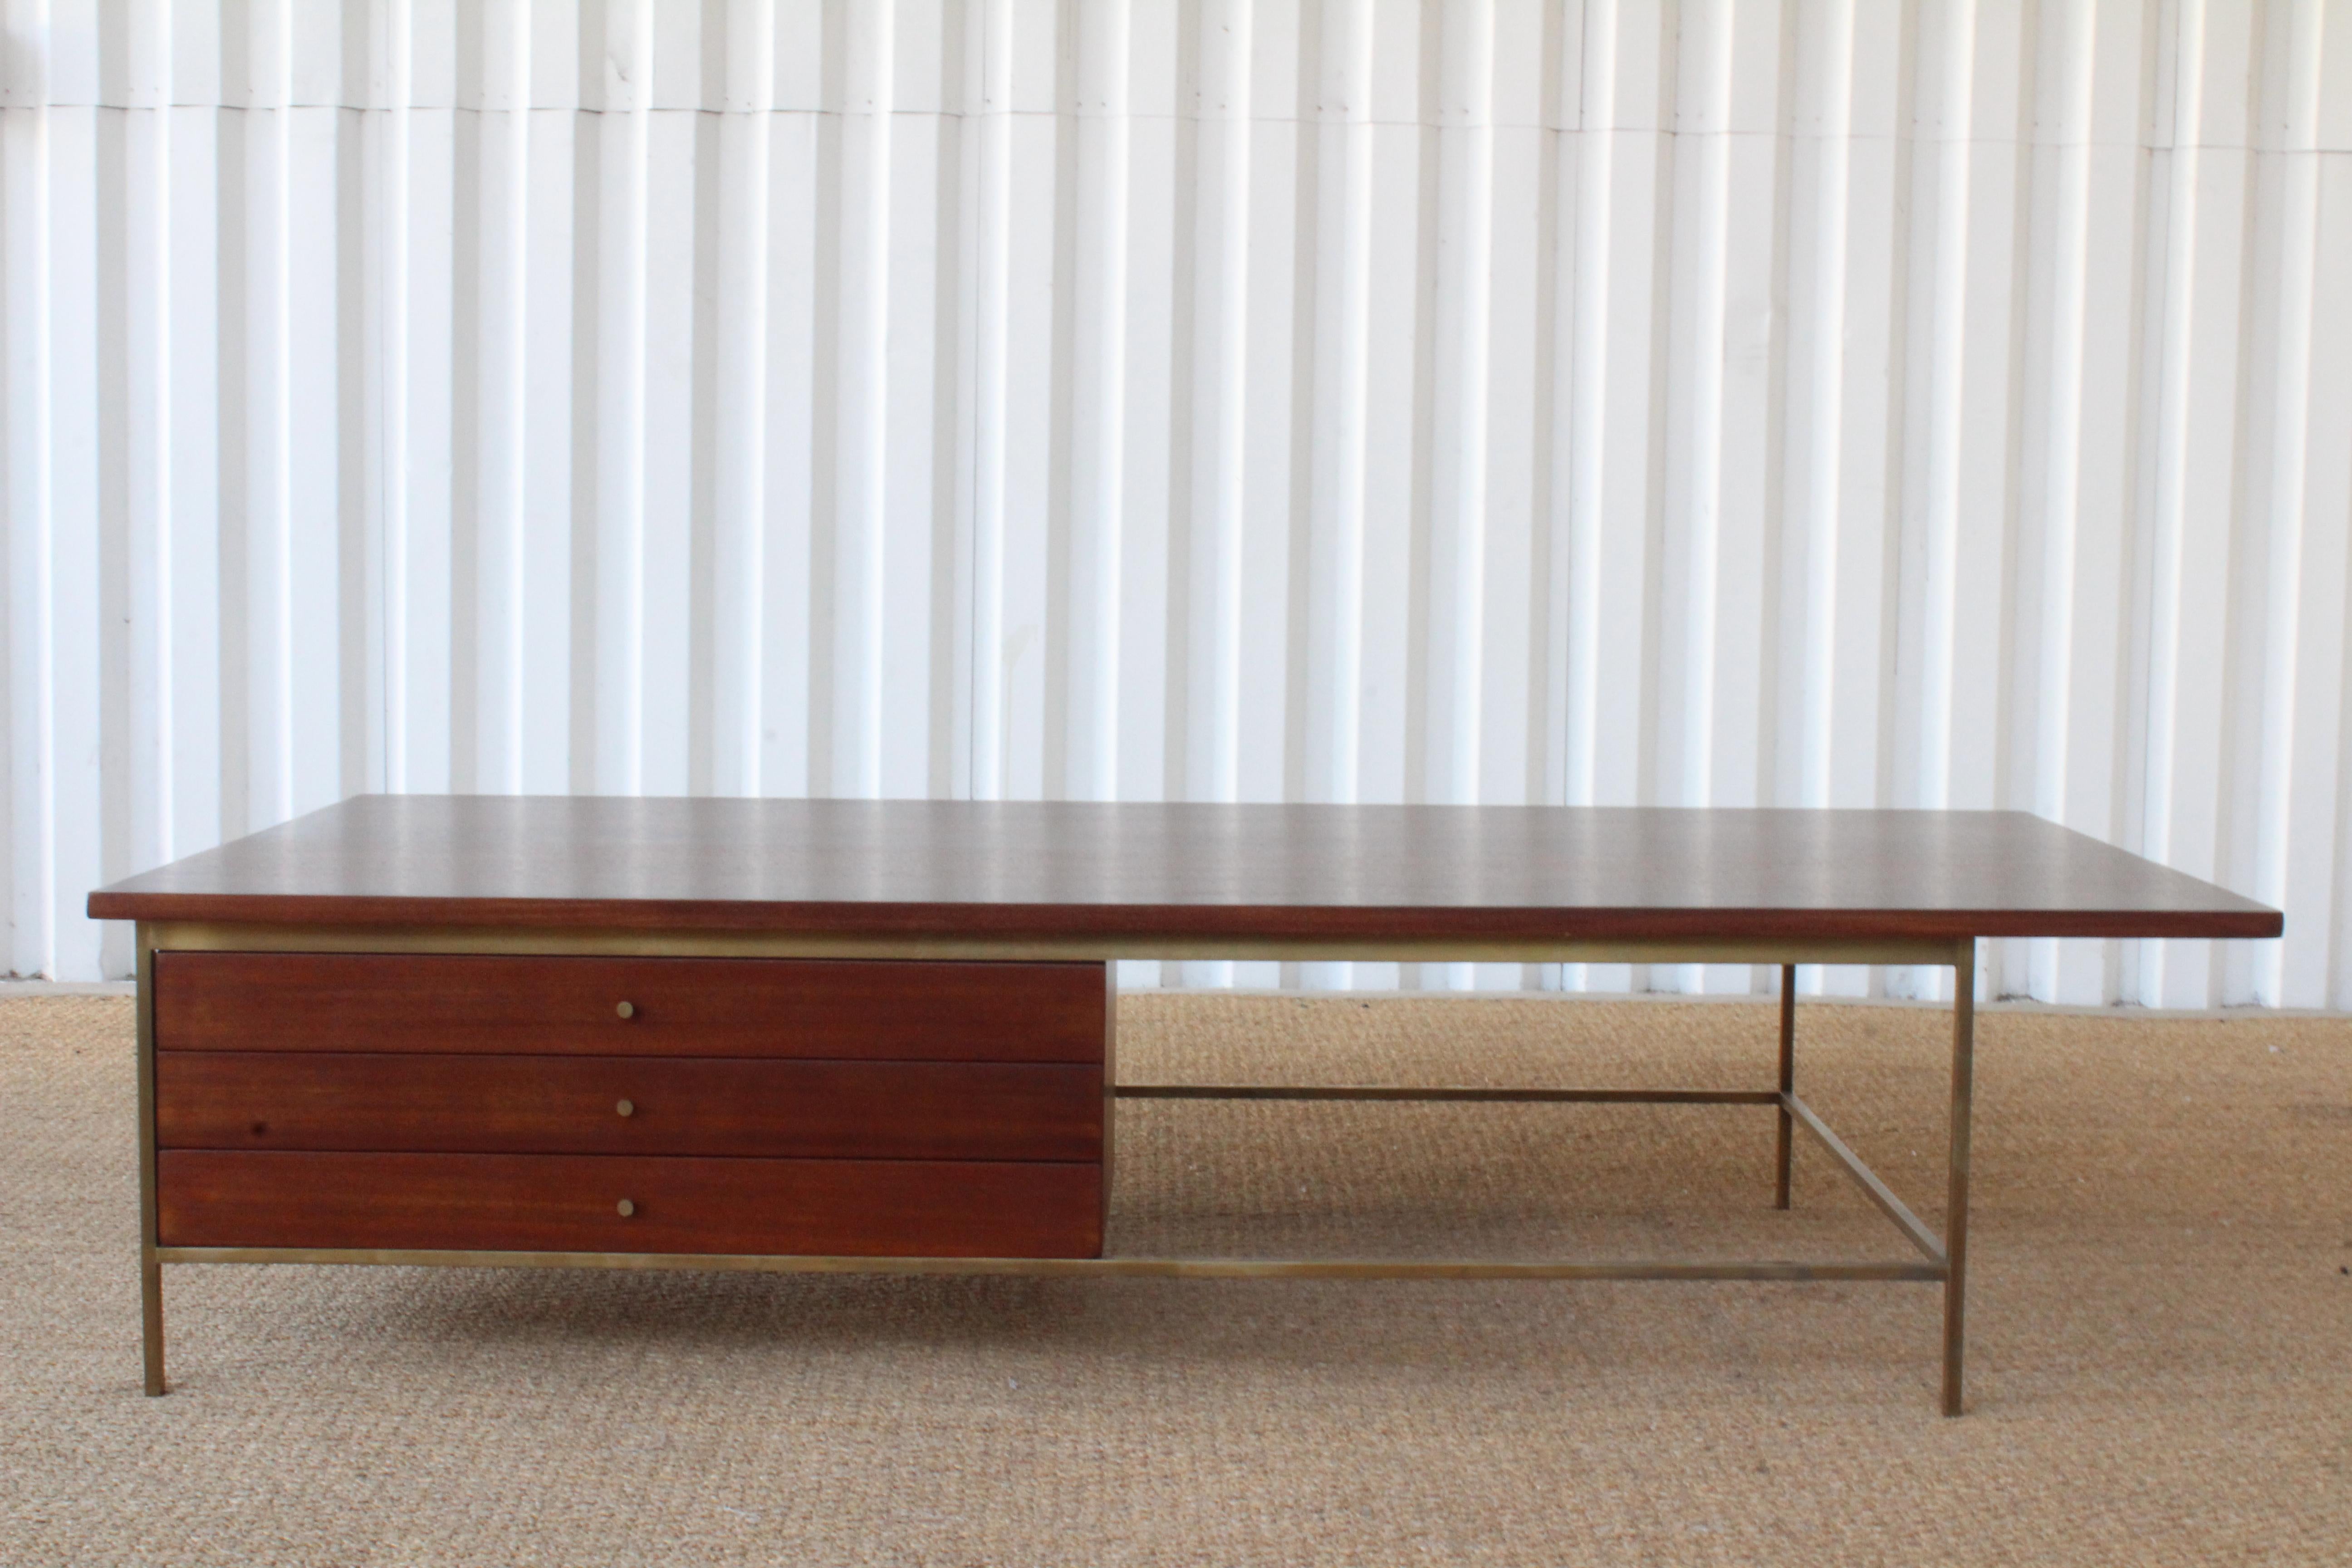 Vintage 1950s coffee table designed by Paul McCobb, part of the Irwin Collection for Calvin Furniture. Features a brass base and mahogany top with three drawers. The mahogany has been recently refinished. There are a few minor veneer repairs.